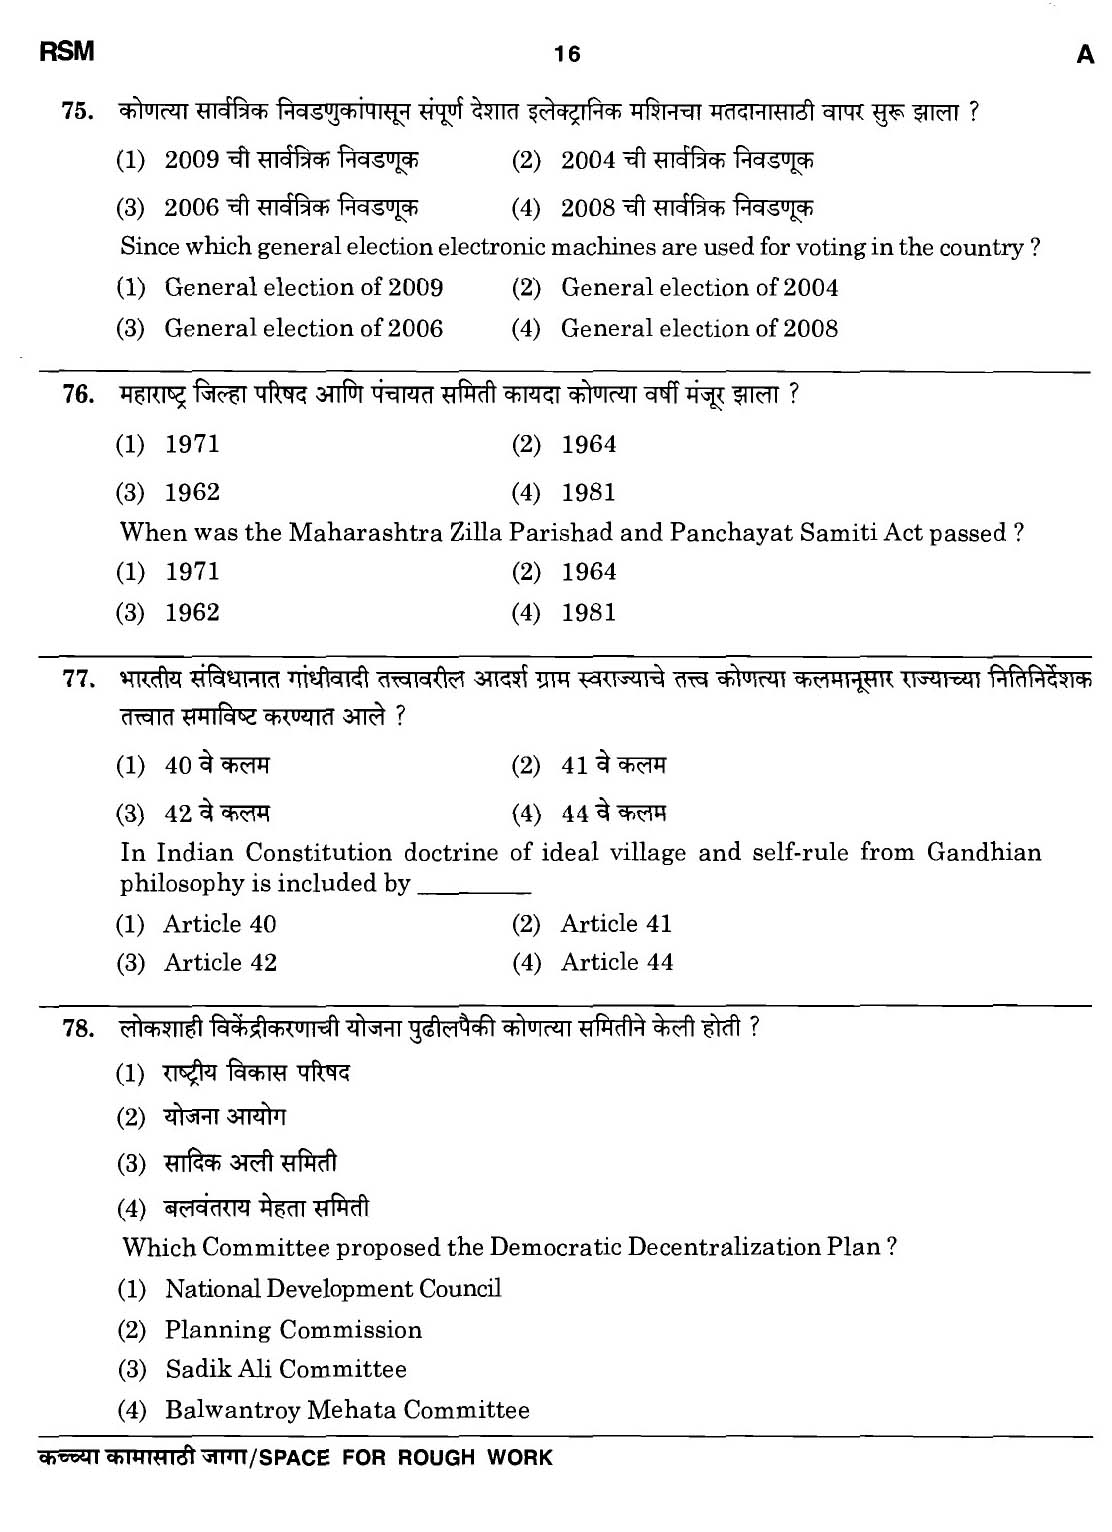 MPSC Agricultural Services Preliminary Exam 2011 Question Paper 15